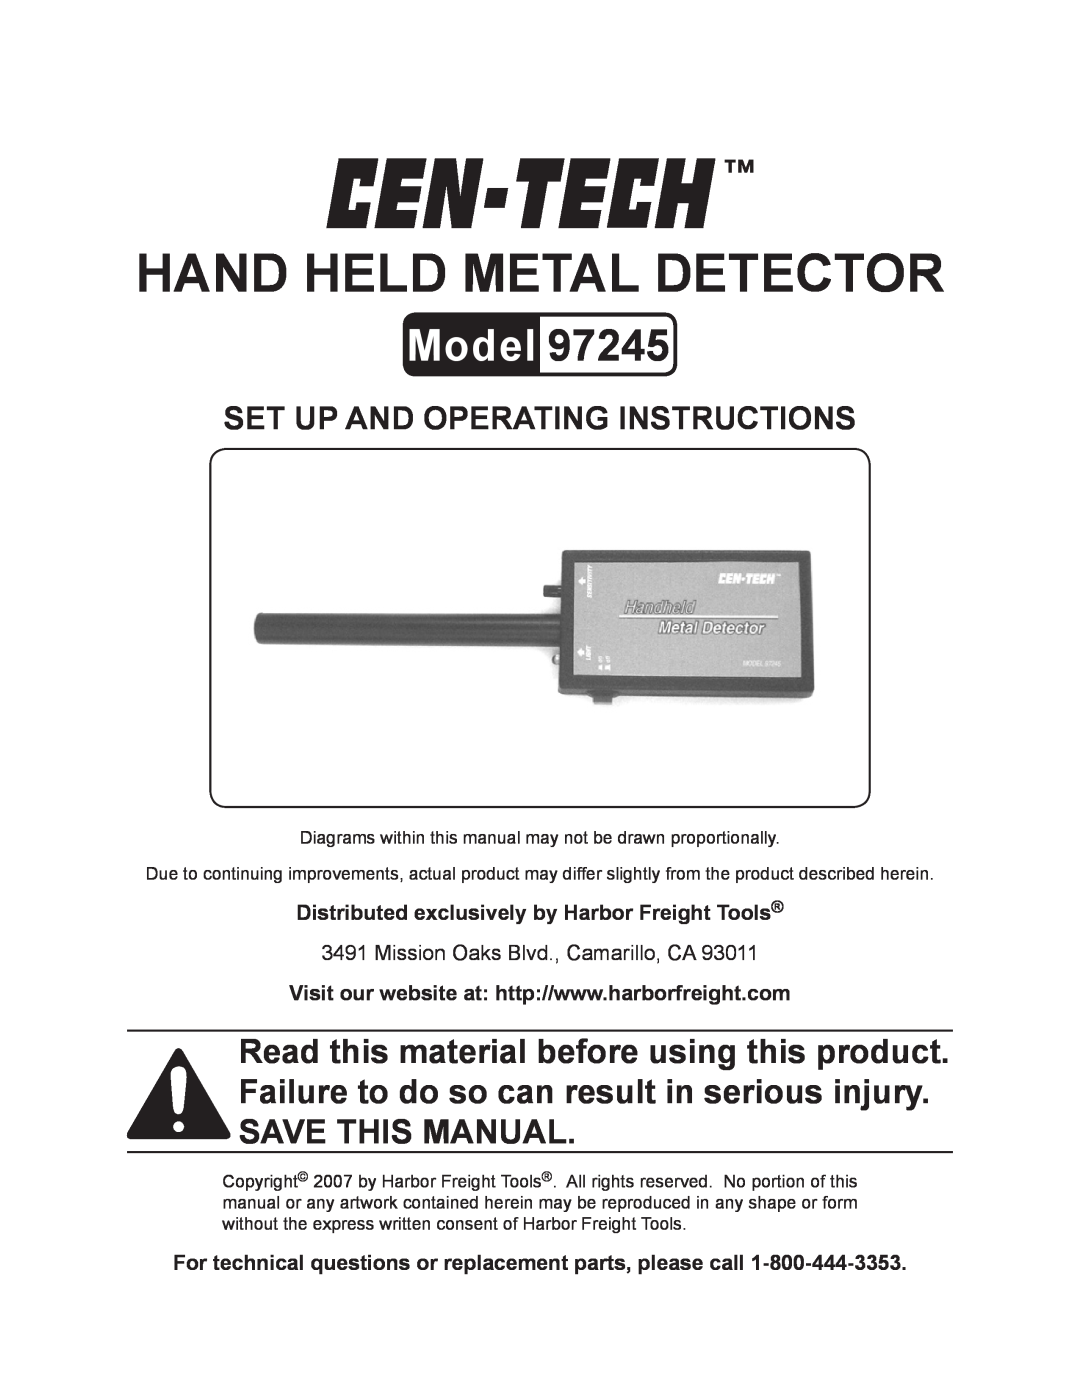 Harbor Freight Tools 97245 manual Distributed exclusively by Harbor Freight Tools, Hand Held Metal Detector, Model 